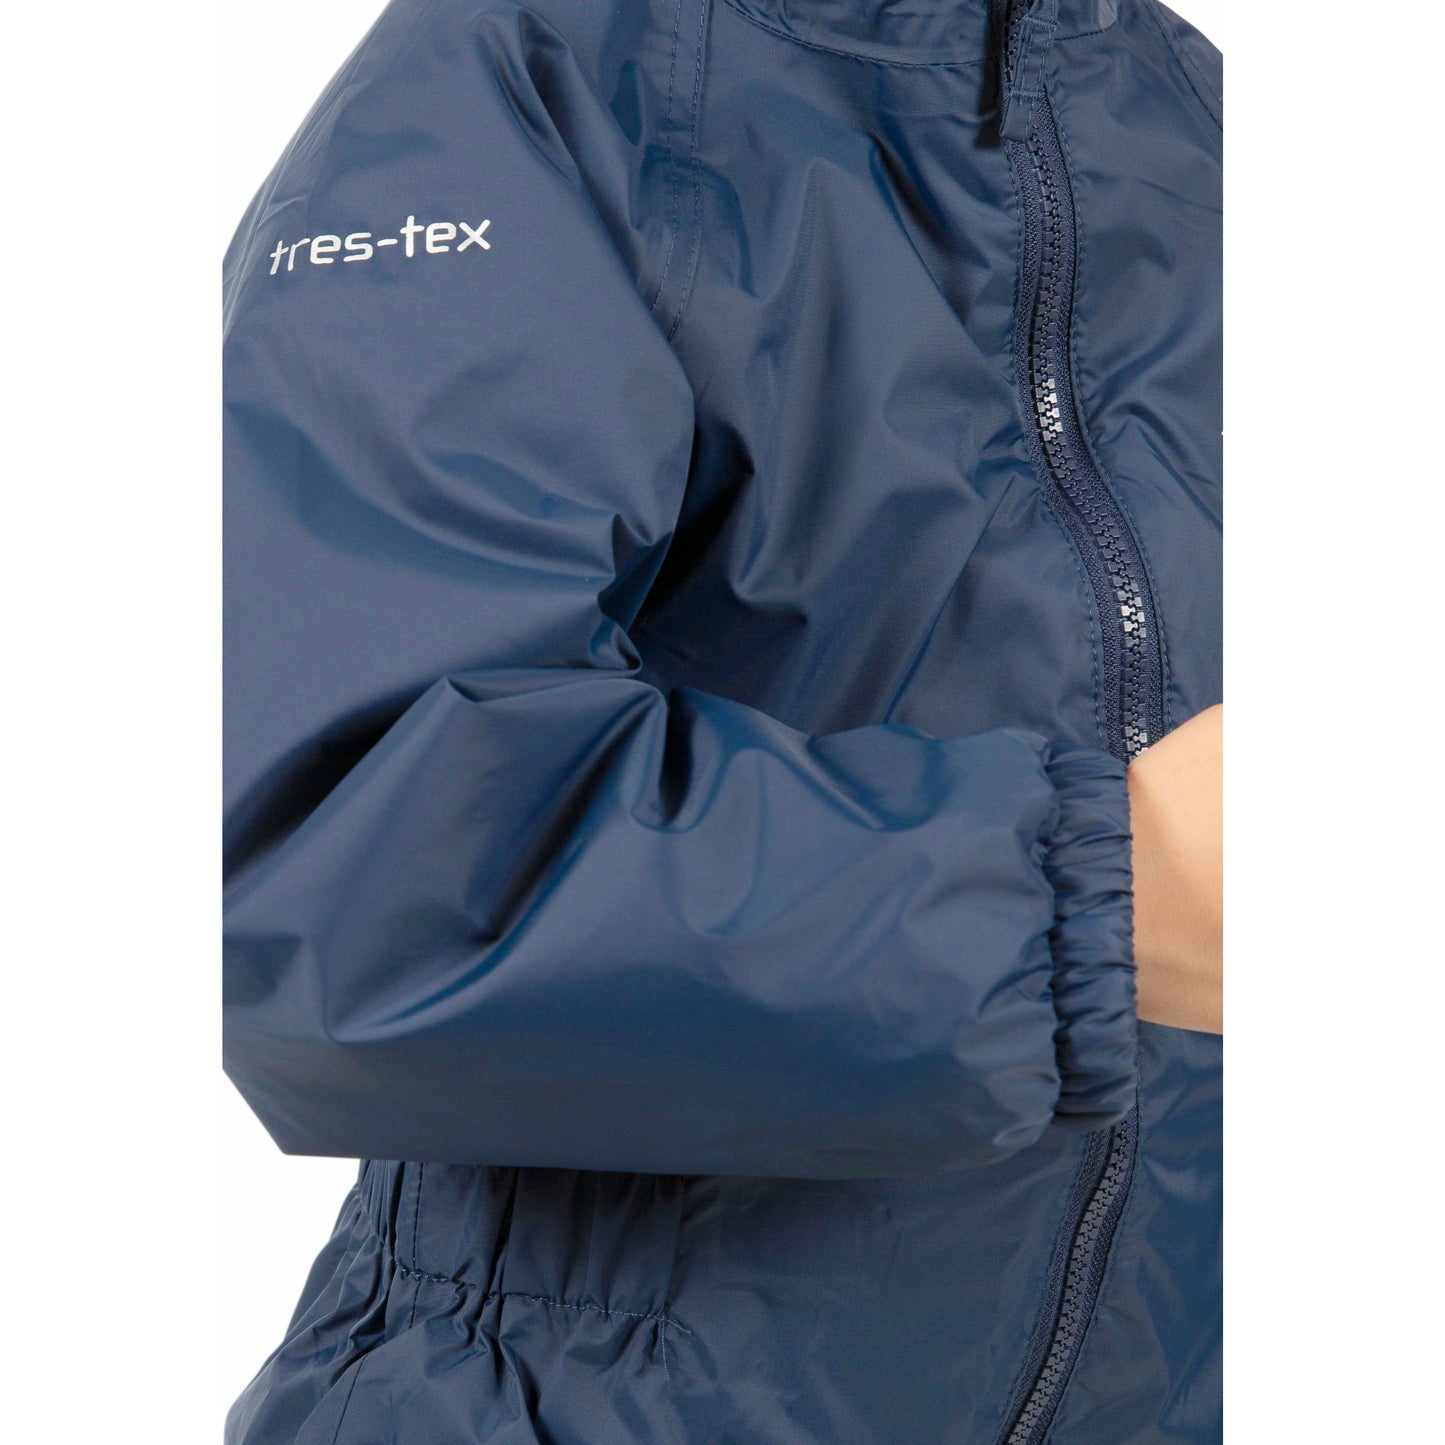 DripDrop Childs Padded Waterproof Puddle Suit in Navy